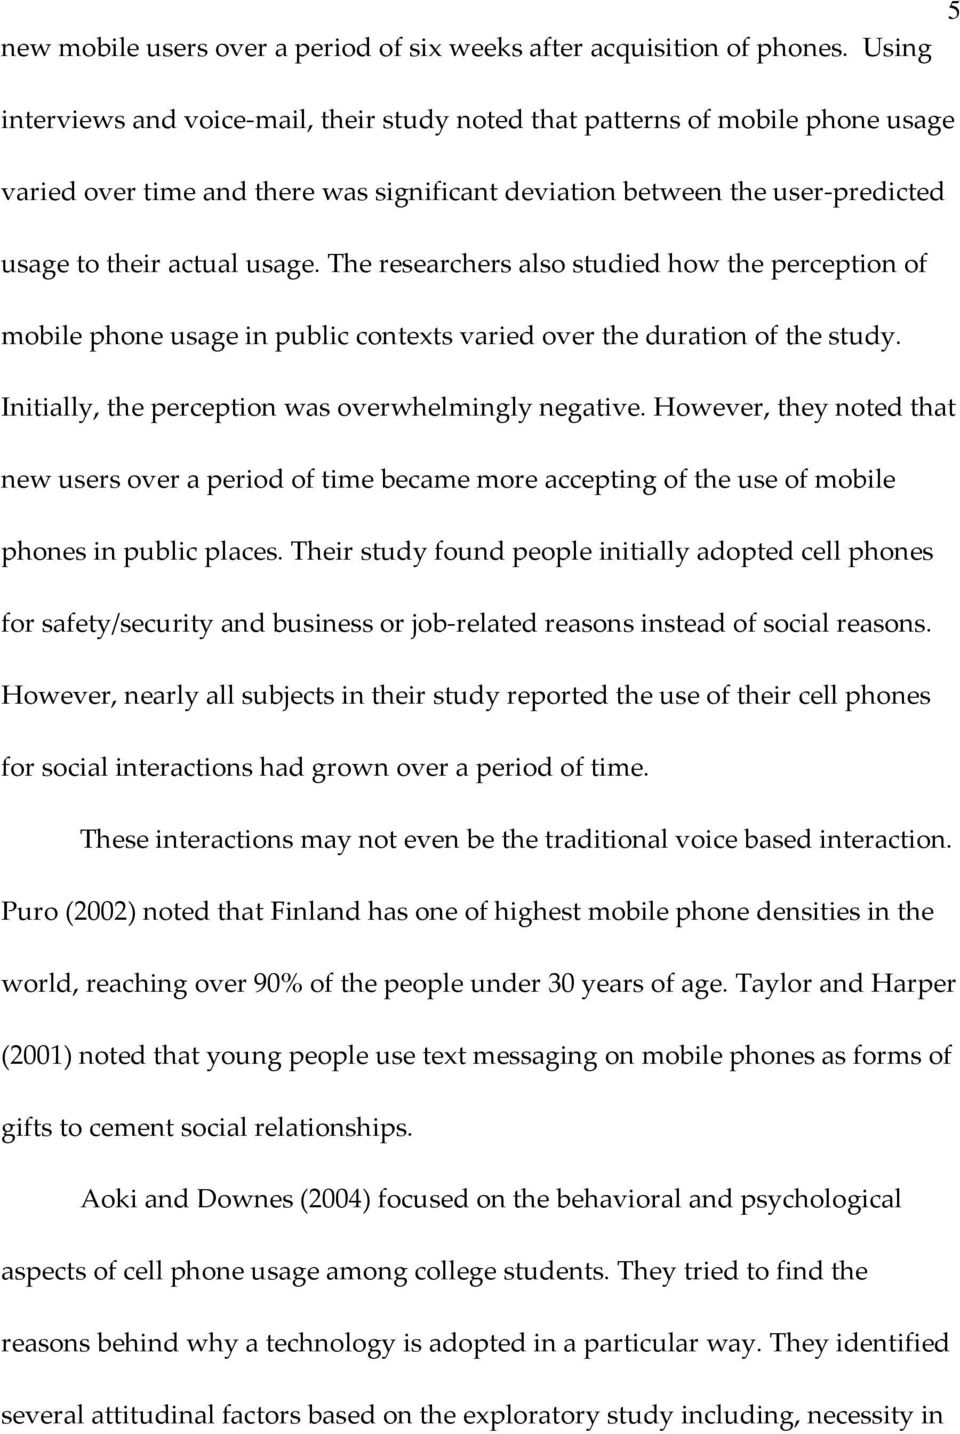 The researchers also studied how the perception of mobile phone usage in public contexts varied over the duration of the study. Initially, the perception was overwhelmingly negative.